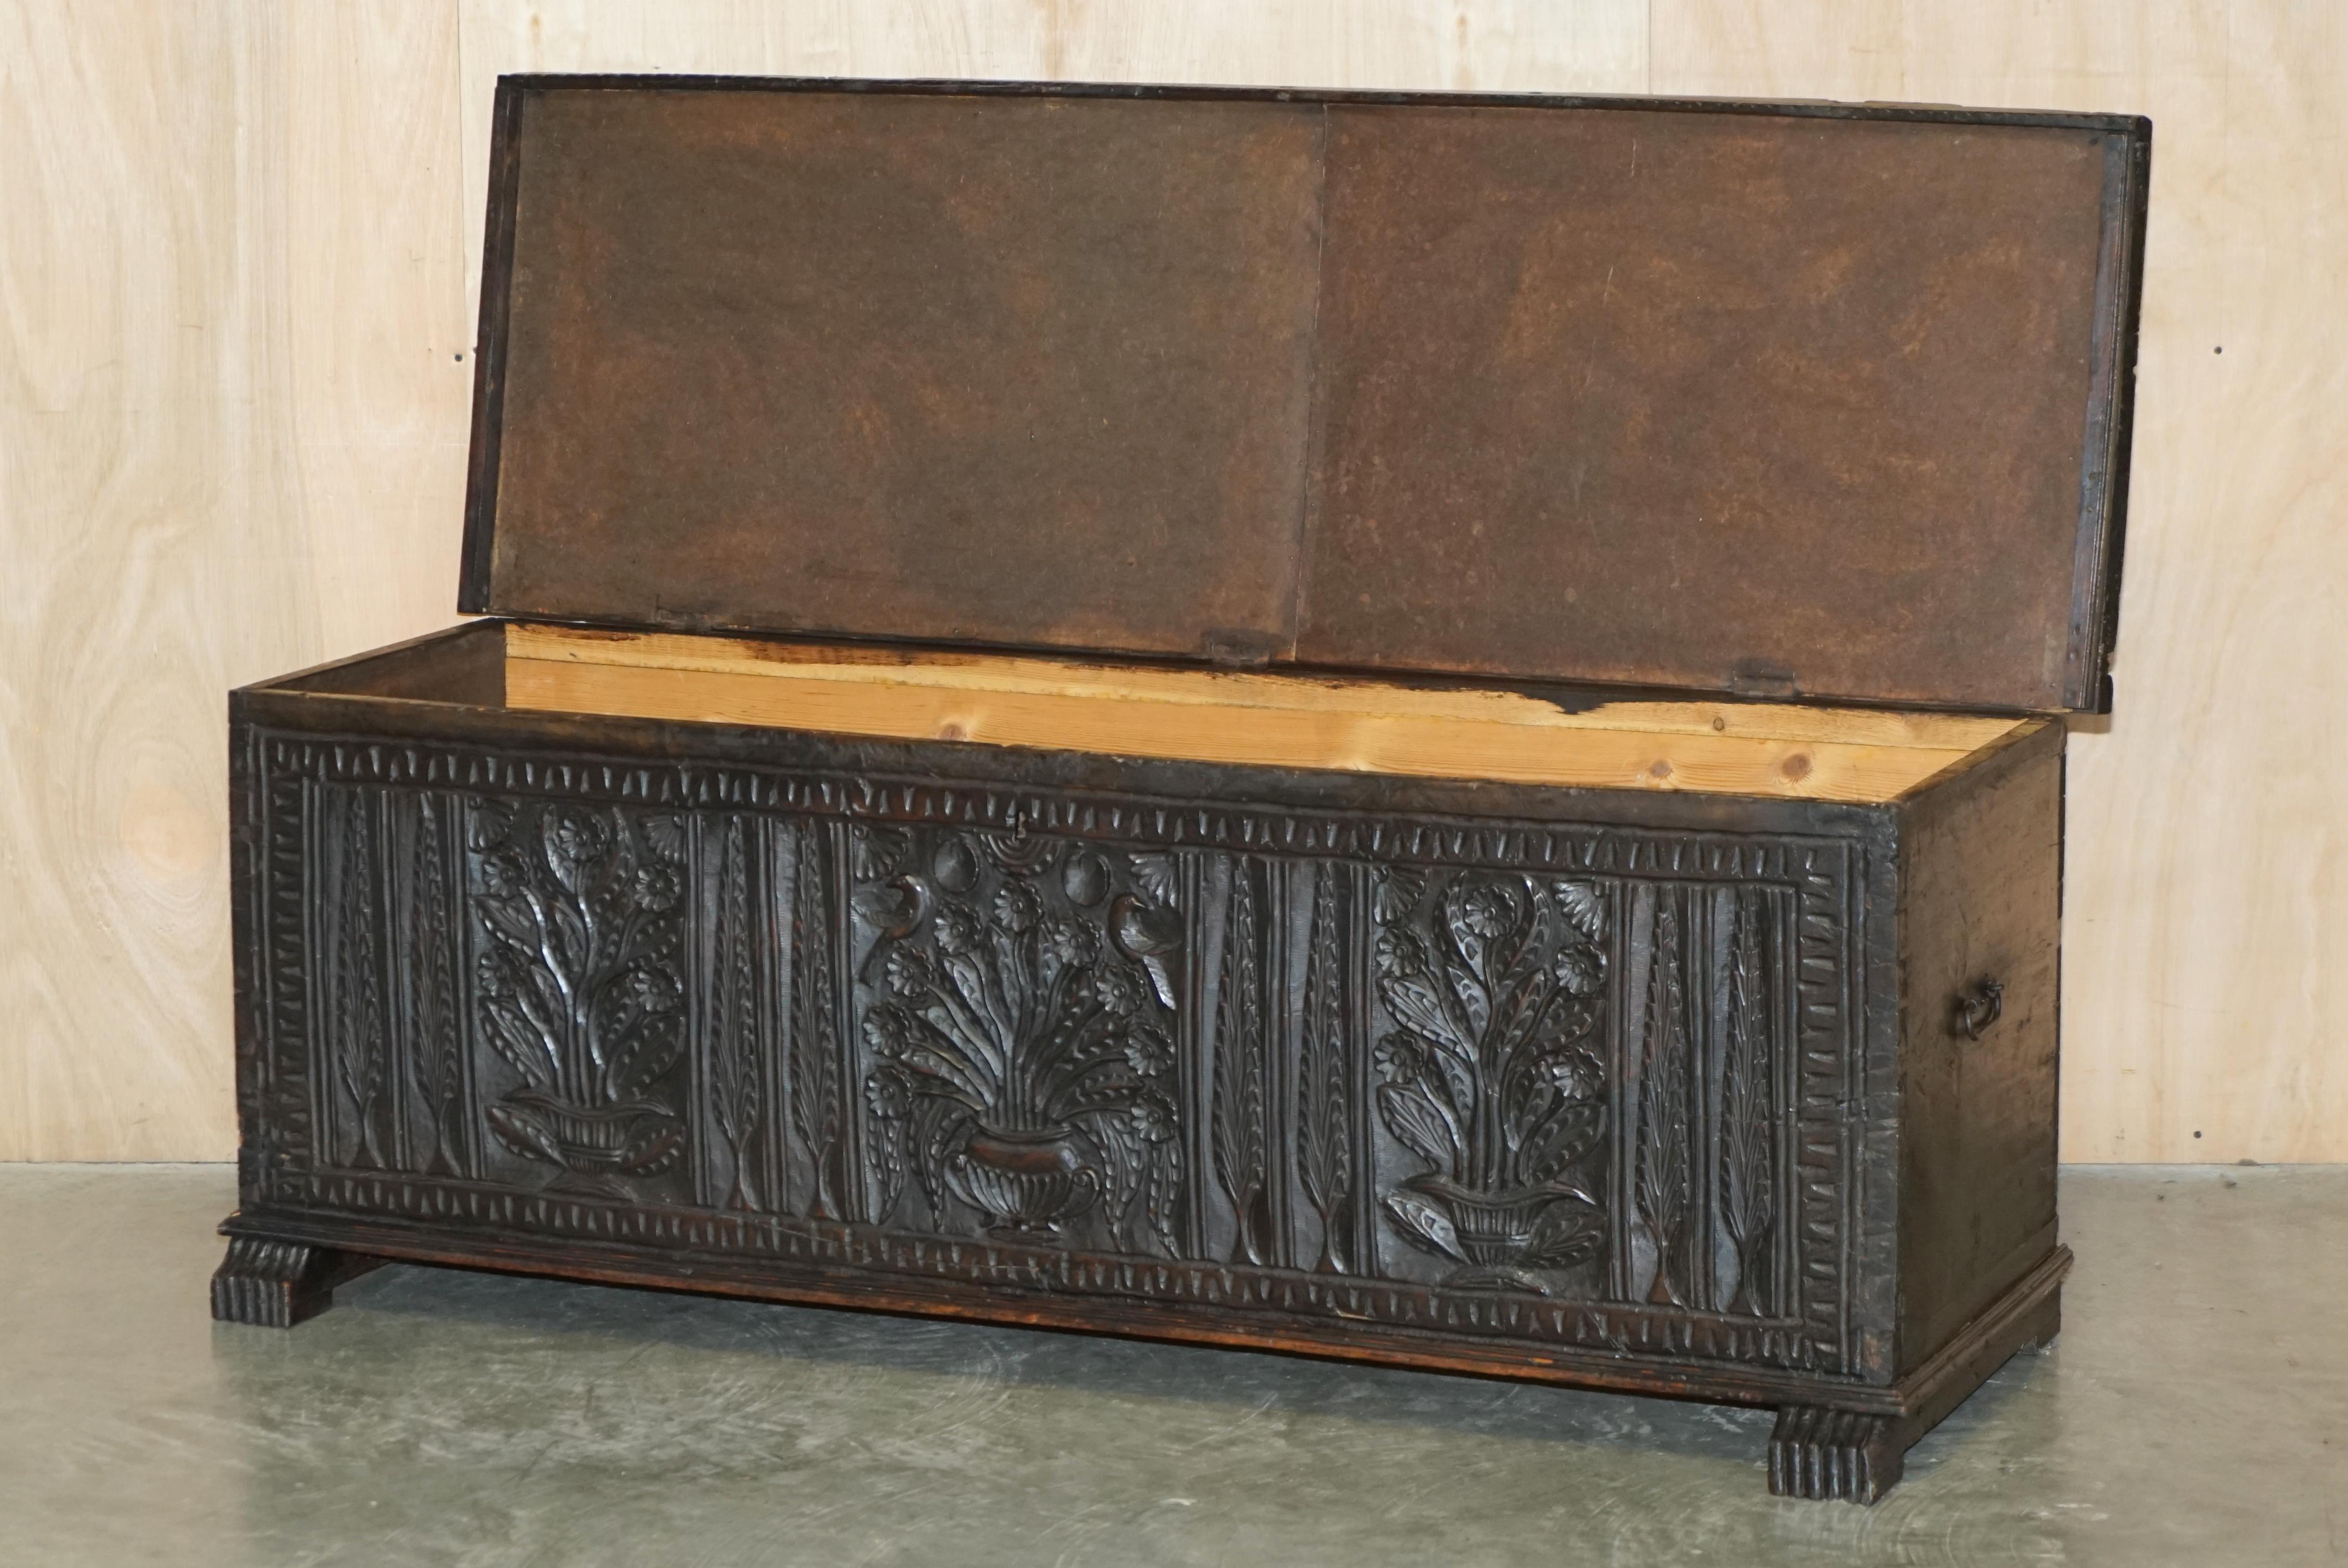 ANTIQUE 19TH CENTURY JACOBEAN REViVAL HAND CARVED TRUNK CHEST OTTOMAN im Angebot 11